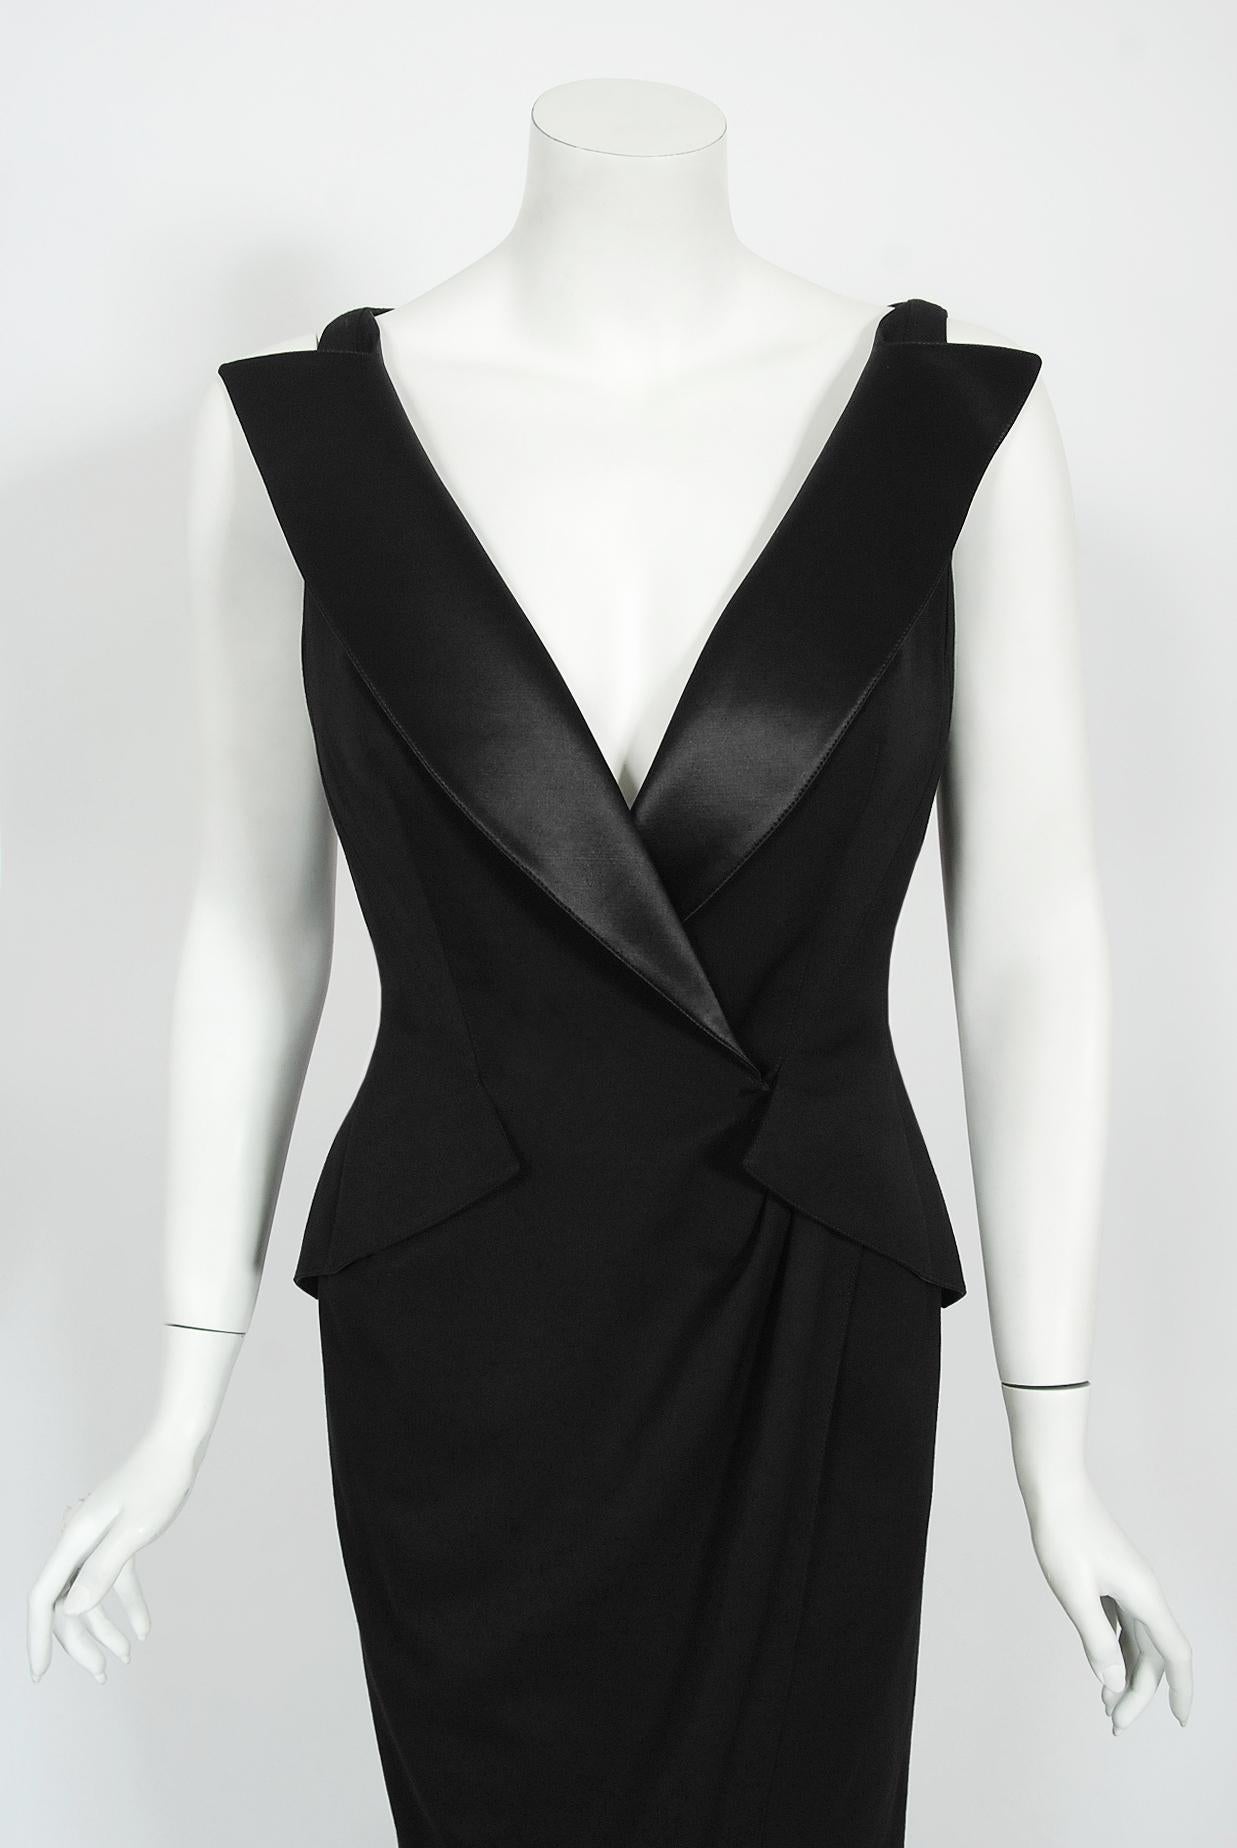 An iconic and totally timeless Thierry Mugler couture fall winter 1999-2000 black bustier hourglass tuxedo gown with original store tags still attached. This legendary French fashion designer is known for bold fashion and edgy, sometimes even campy,